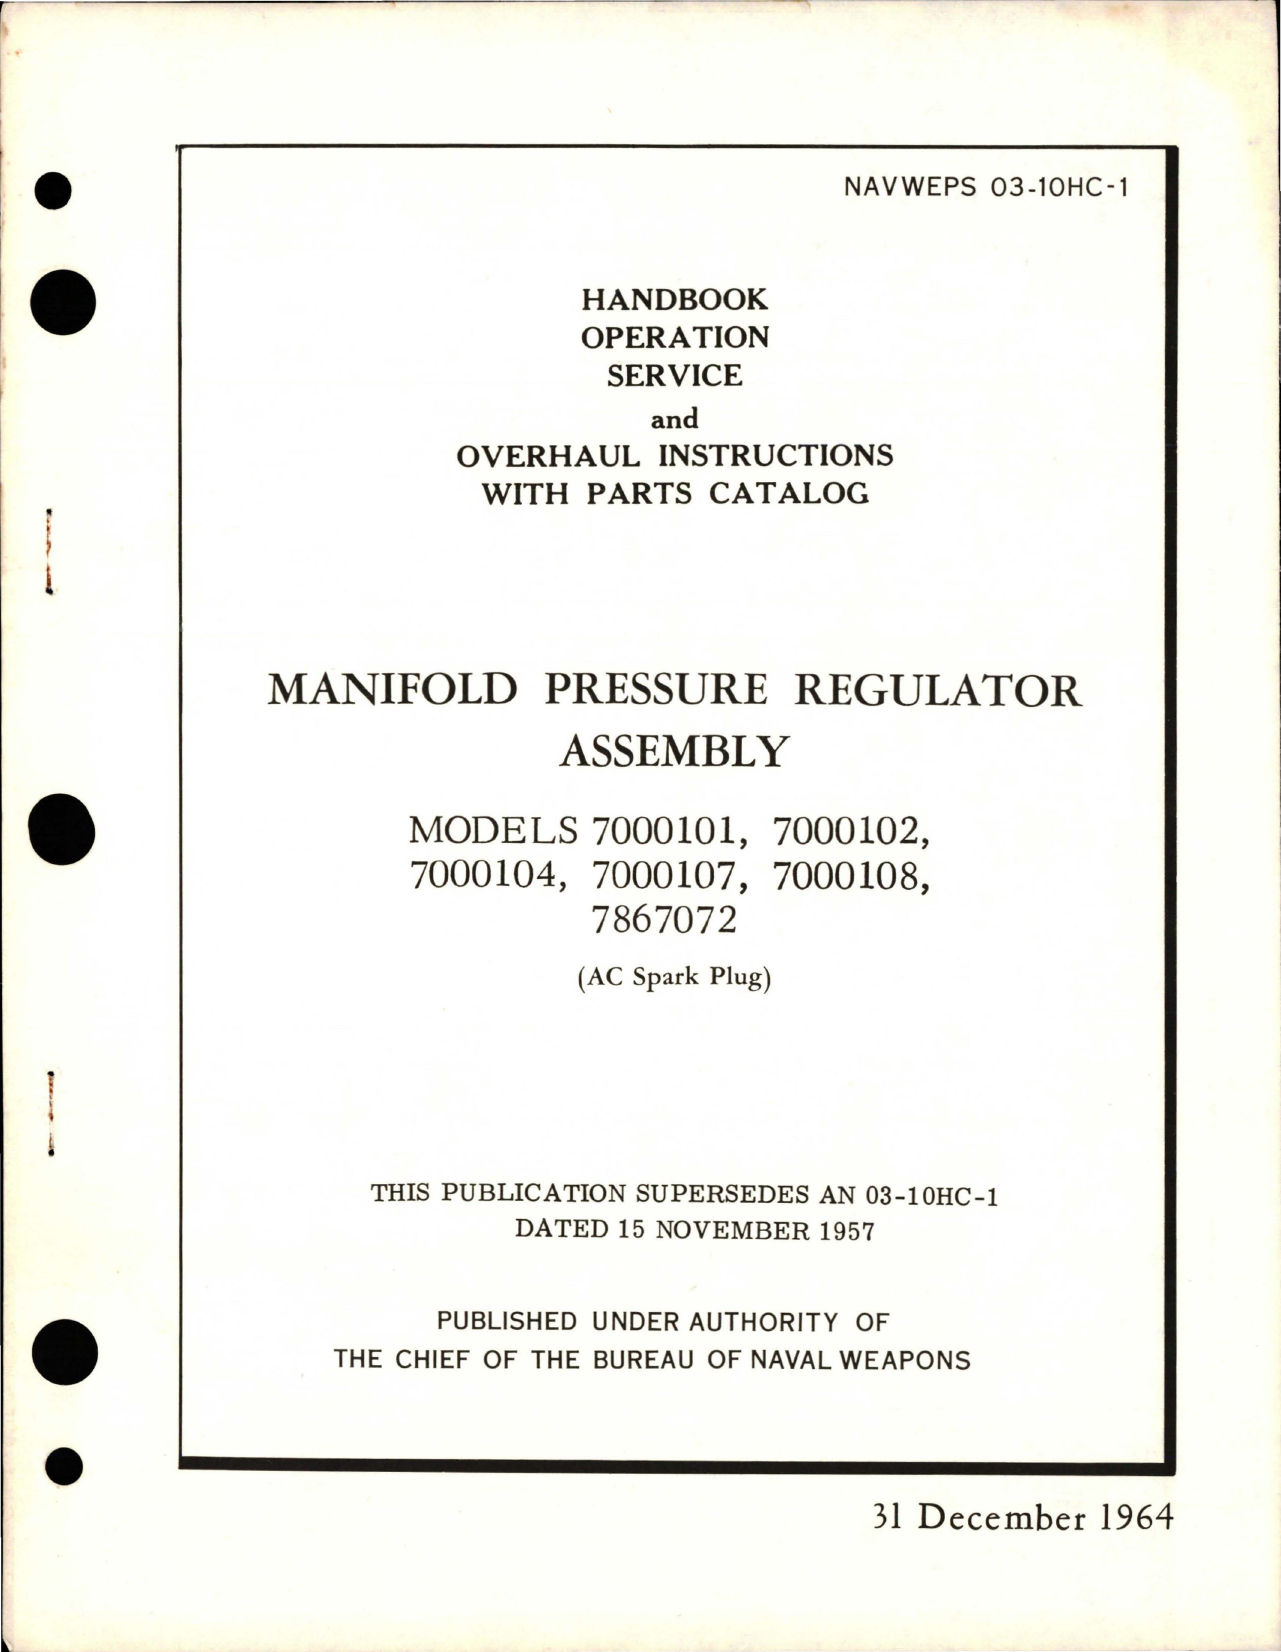 Sample page 1 from AirCorps Library document: Operation, Service, Overhaul Instructions w Parts Catalog for Manifold Pressure Regulator Assembly